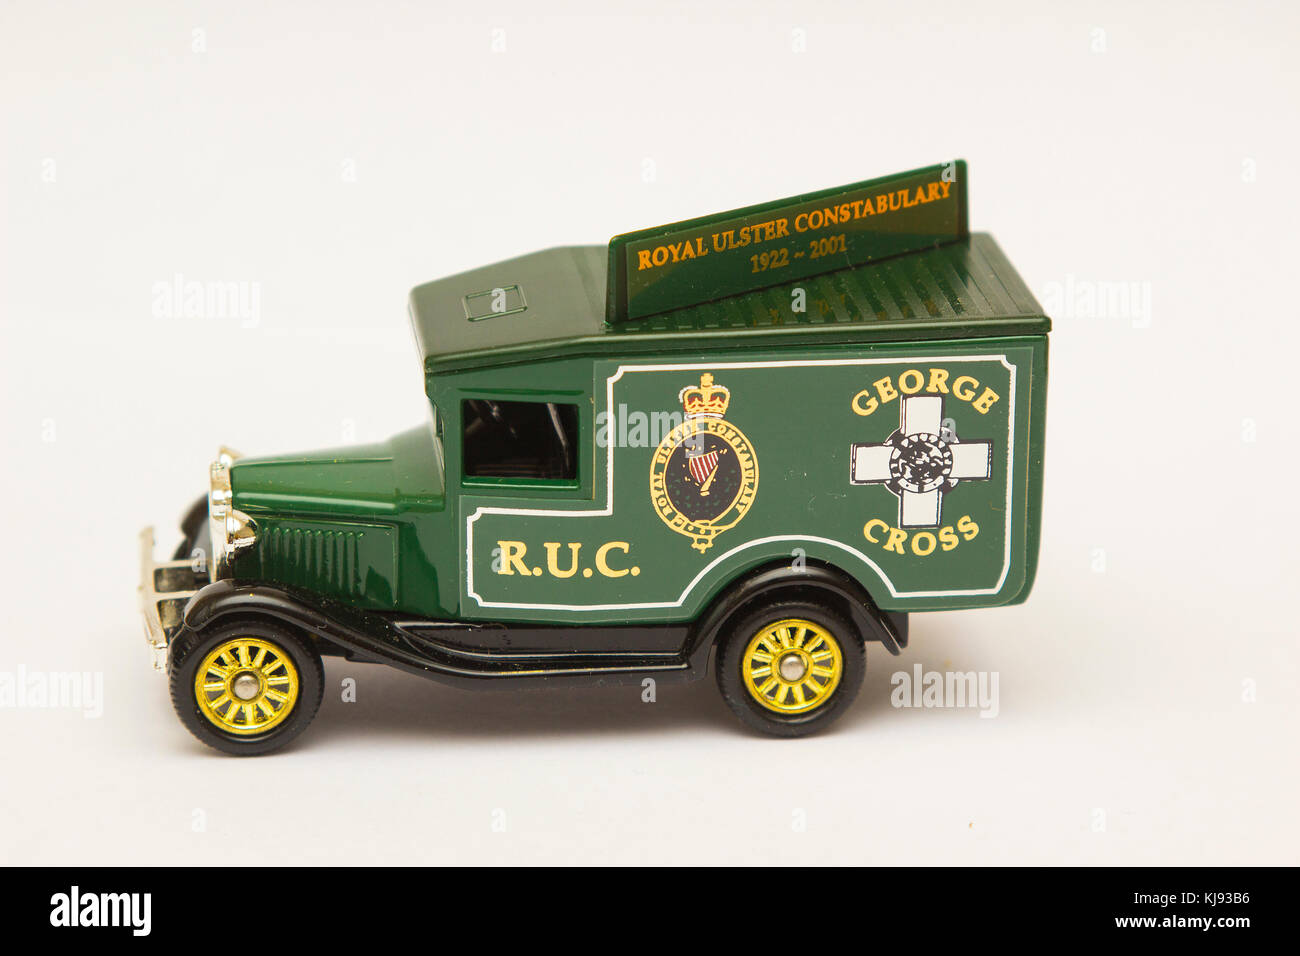 A die cast model of an old Ford Van in the livery of the now disbanded Royal Ulster Constabulary the only armed police force in the United Kingdom Stock Photo